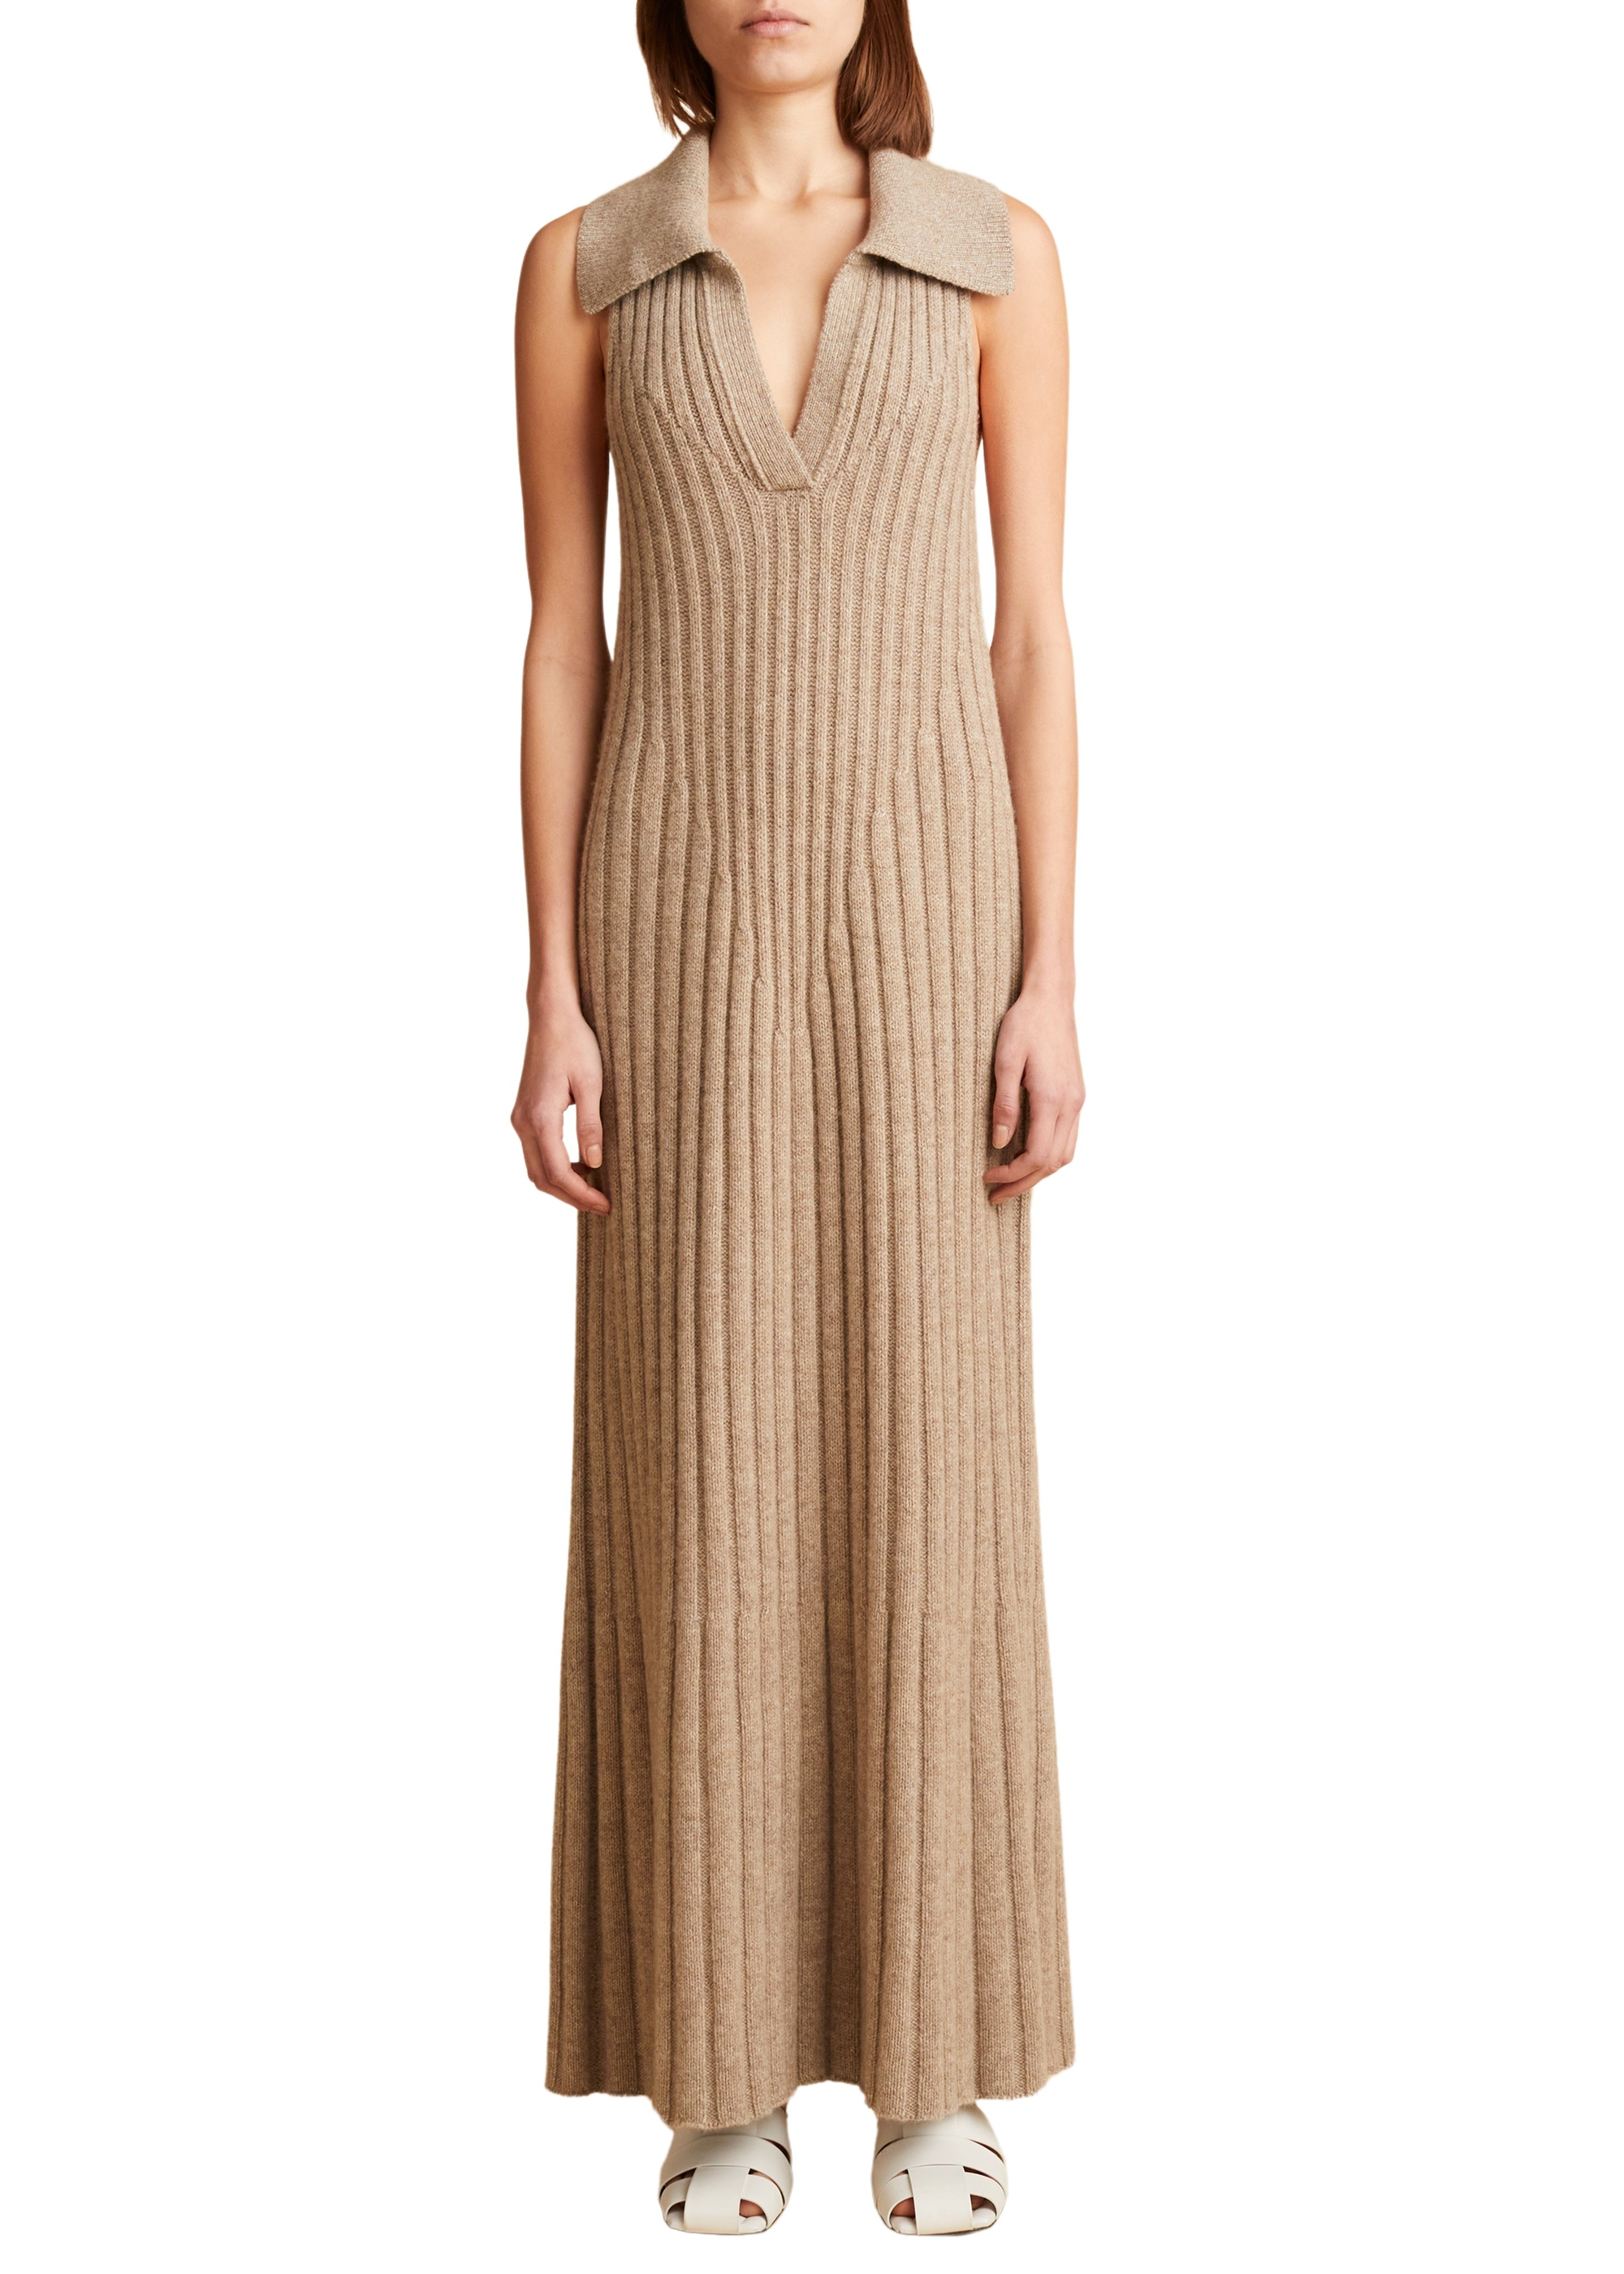 Giselle dress in cashmere - Sepia